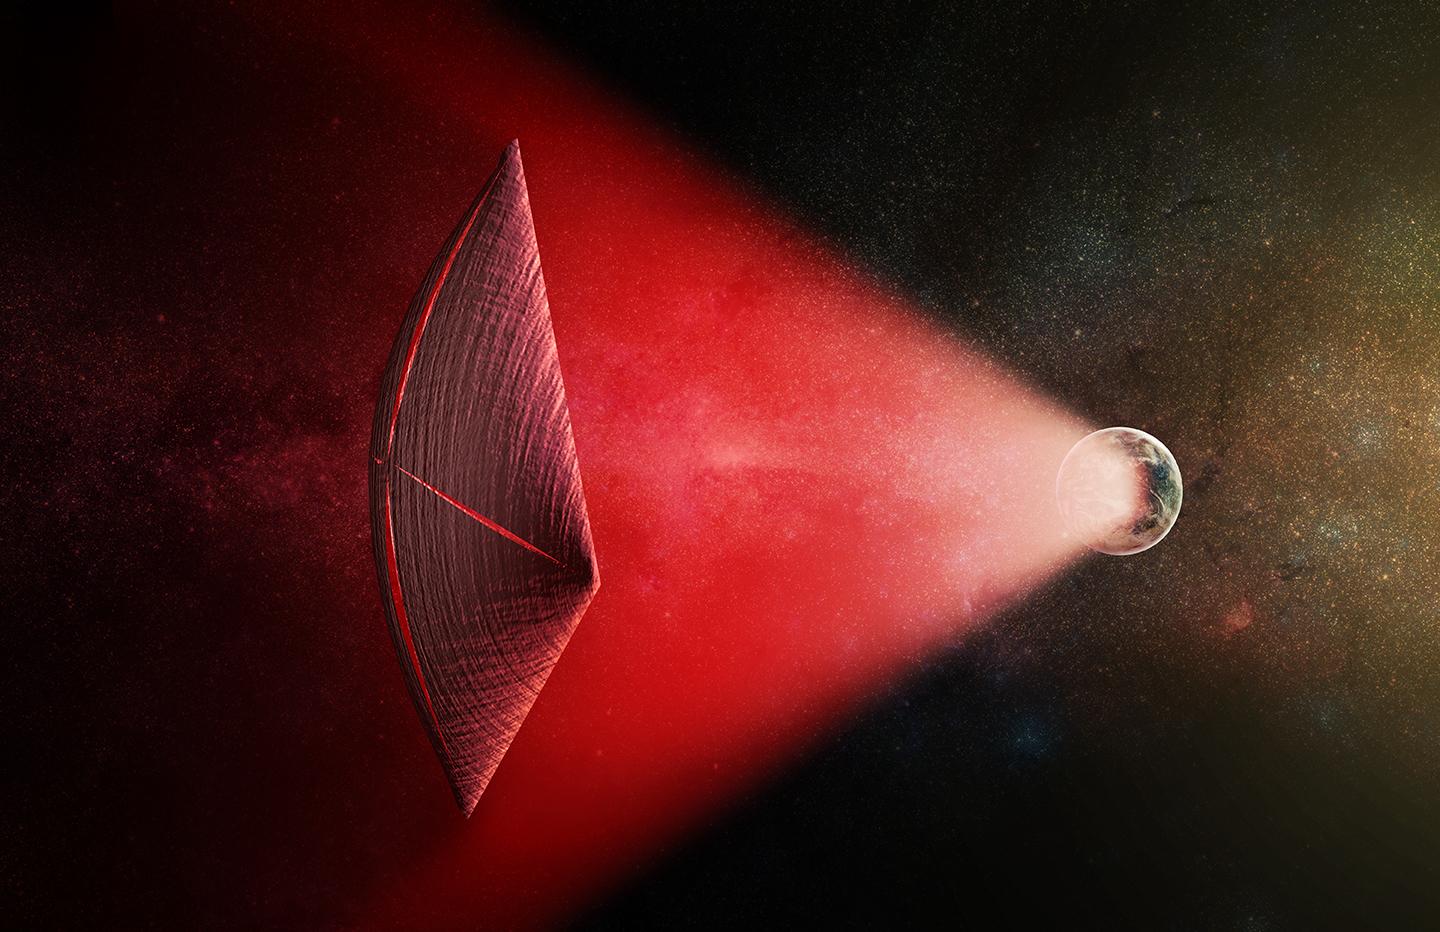 Ground-based lasers have the potential to propel spacecraft towards distant stars at an accelerated pace.